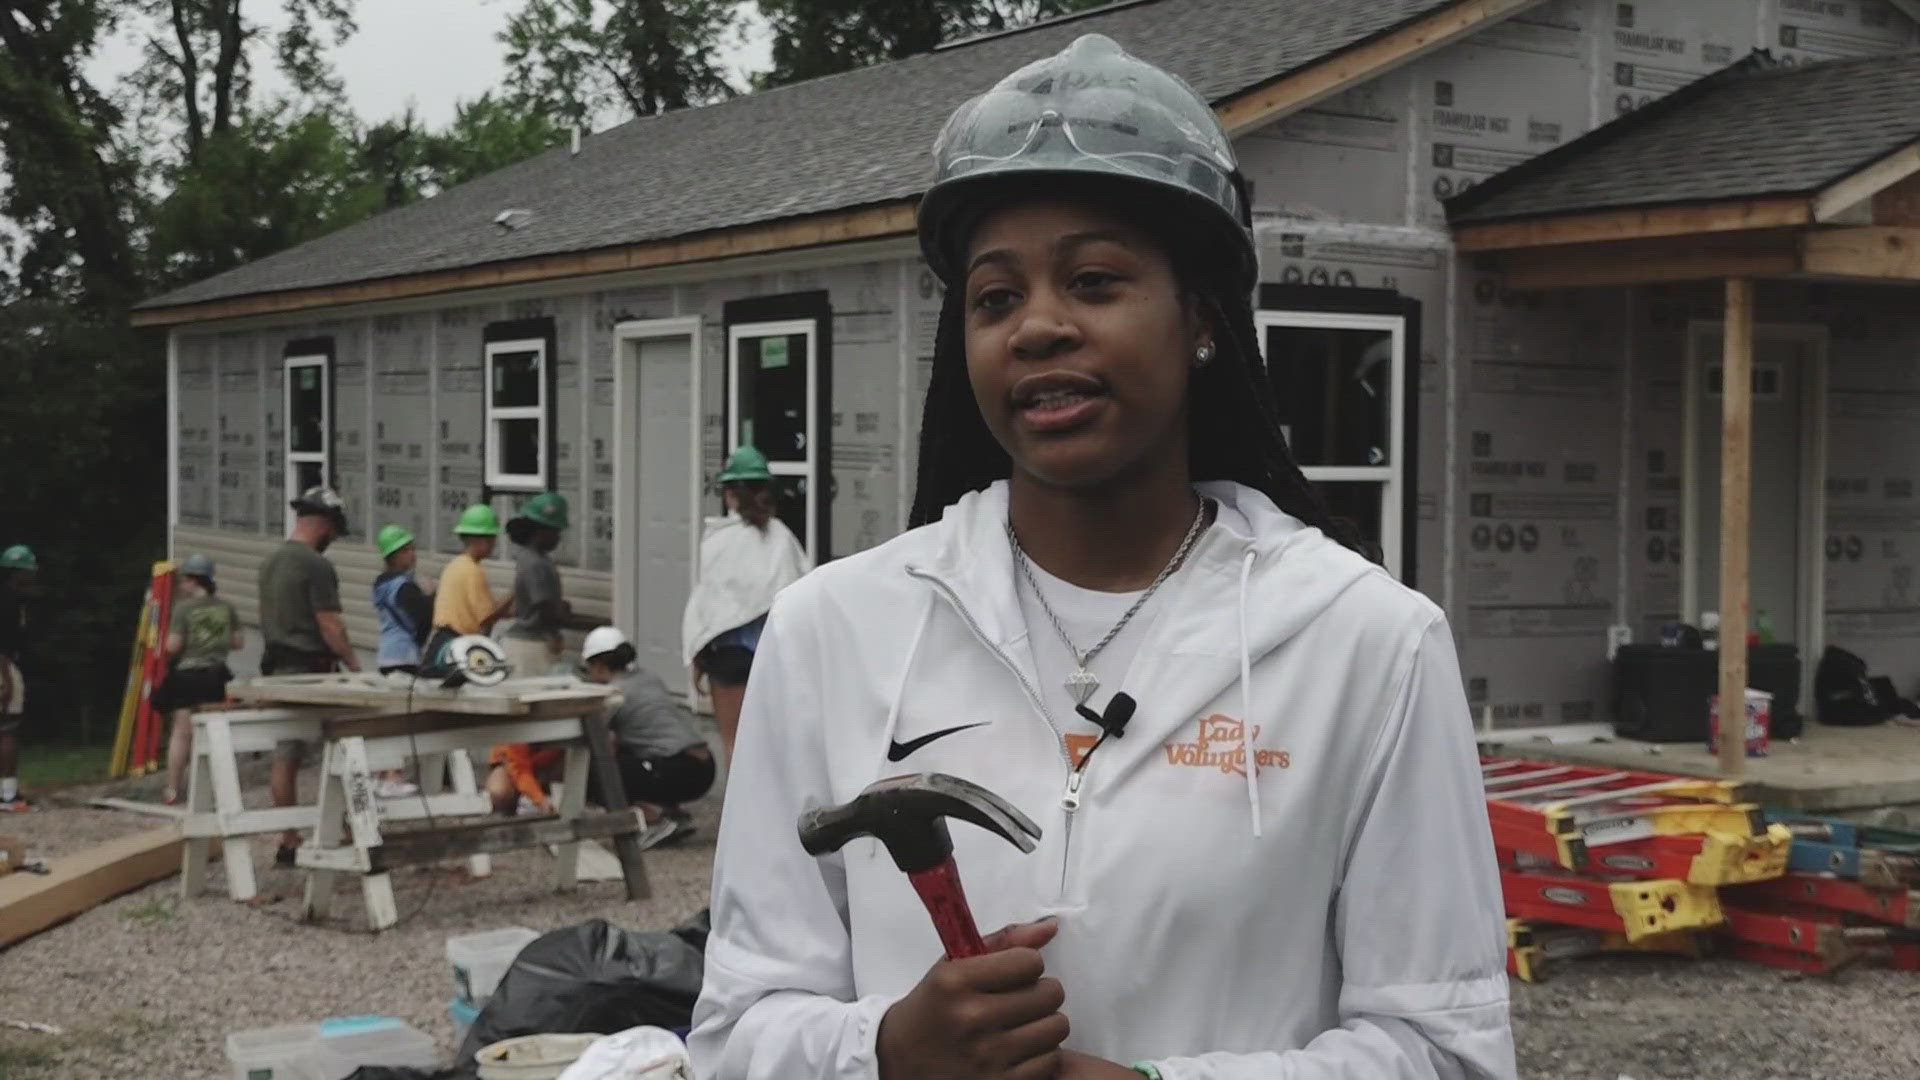 The Lady Vols are working together this summer to build homes for a local veteran family.